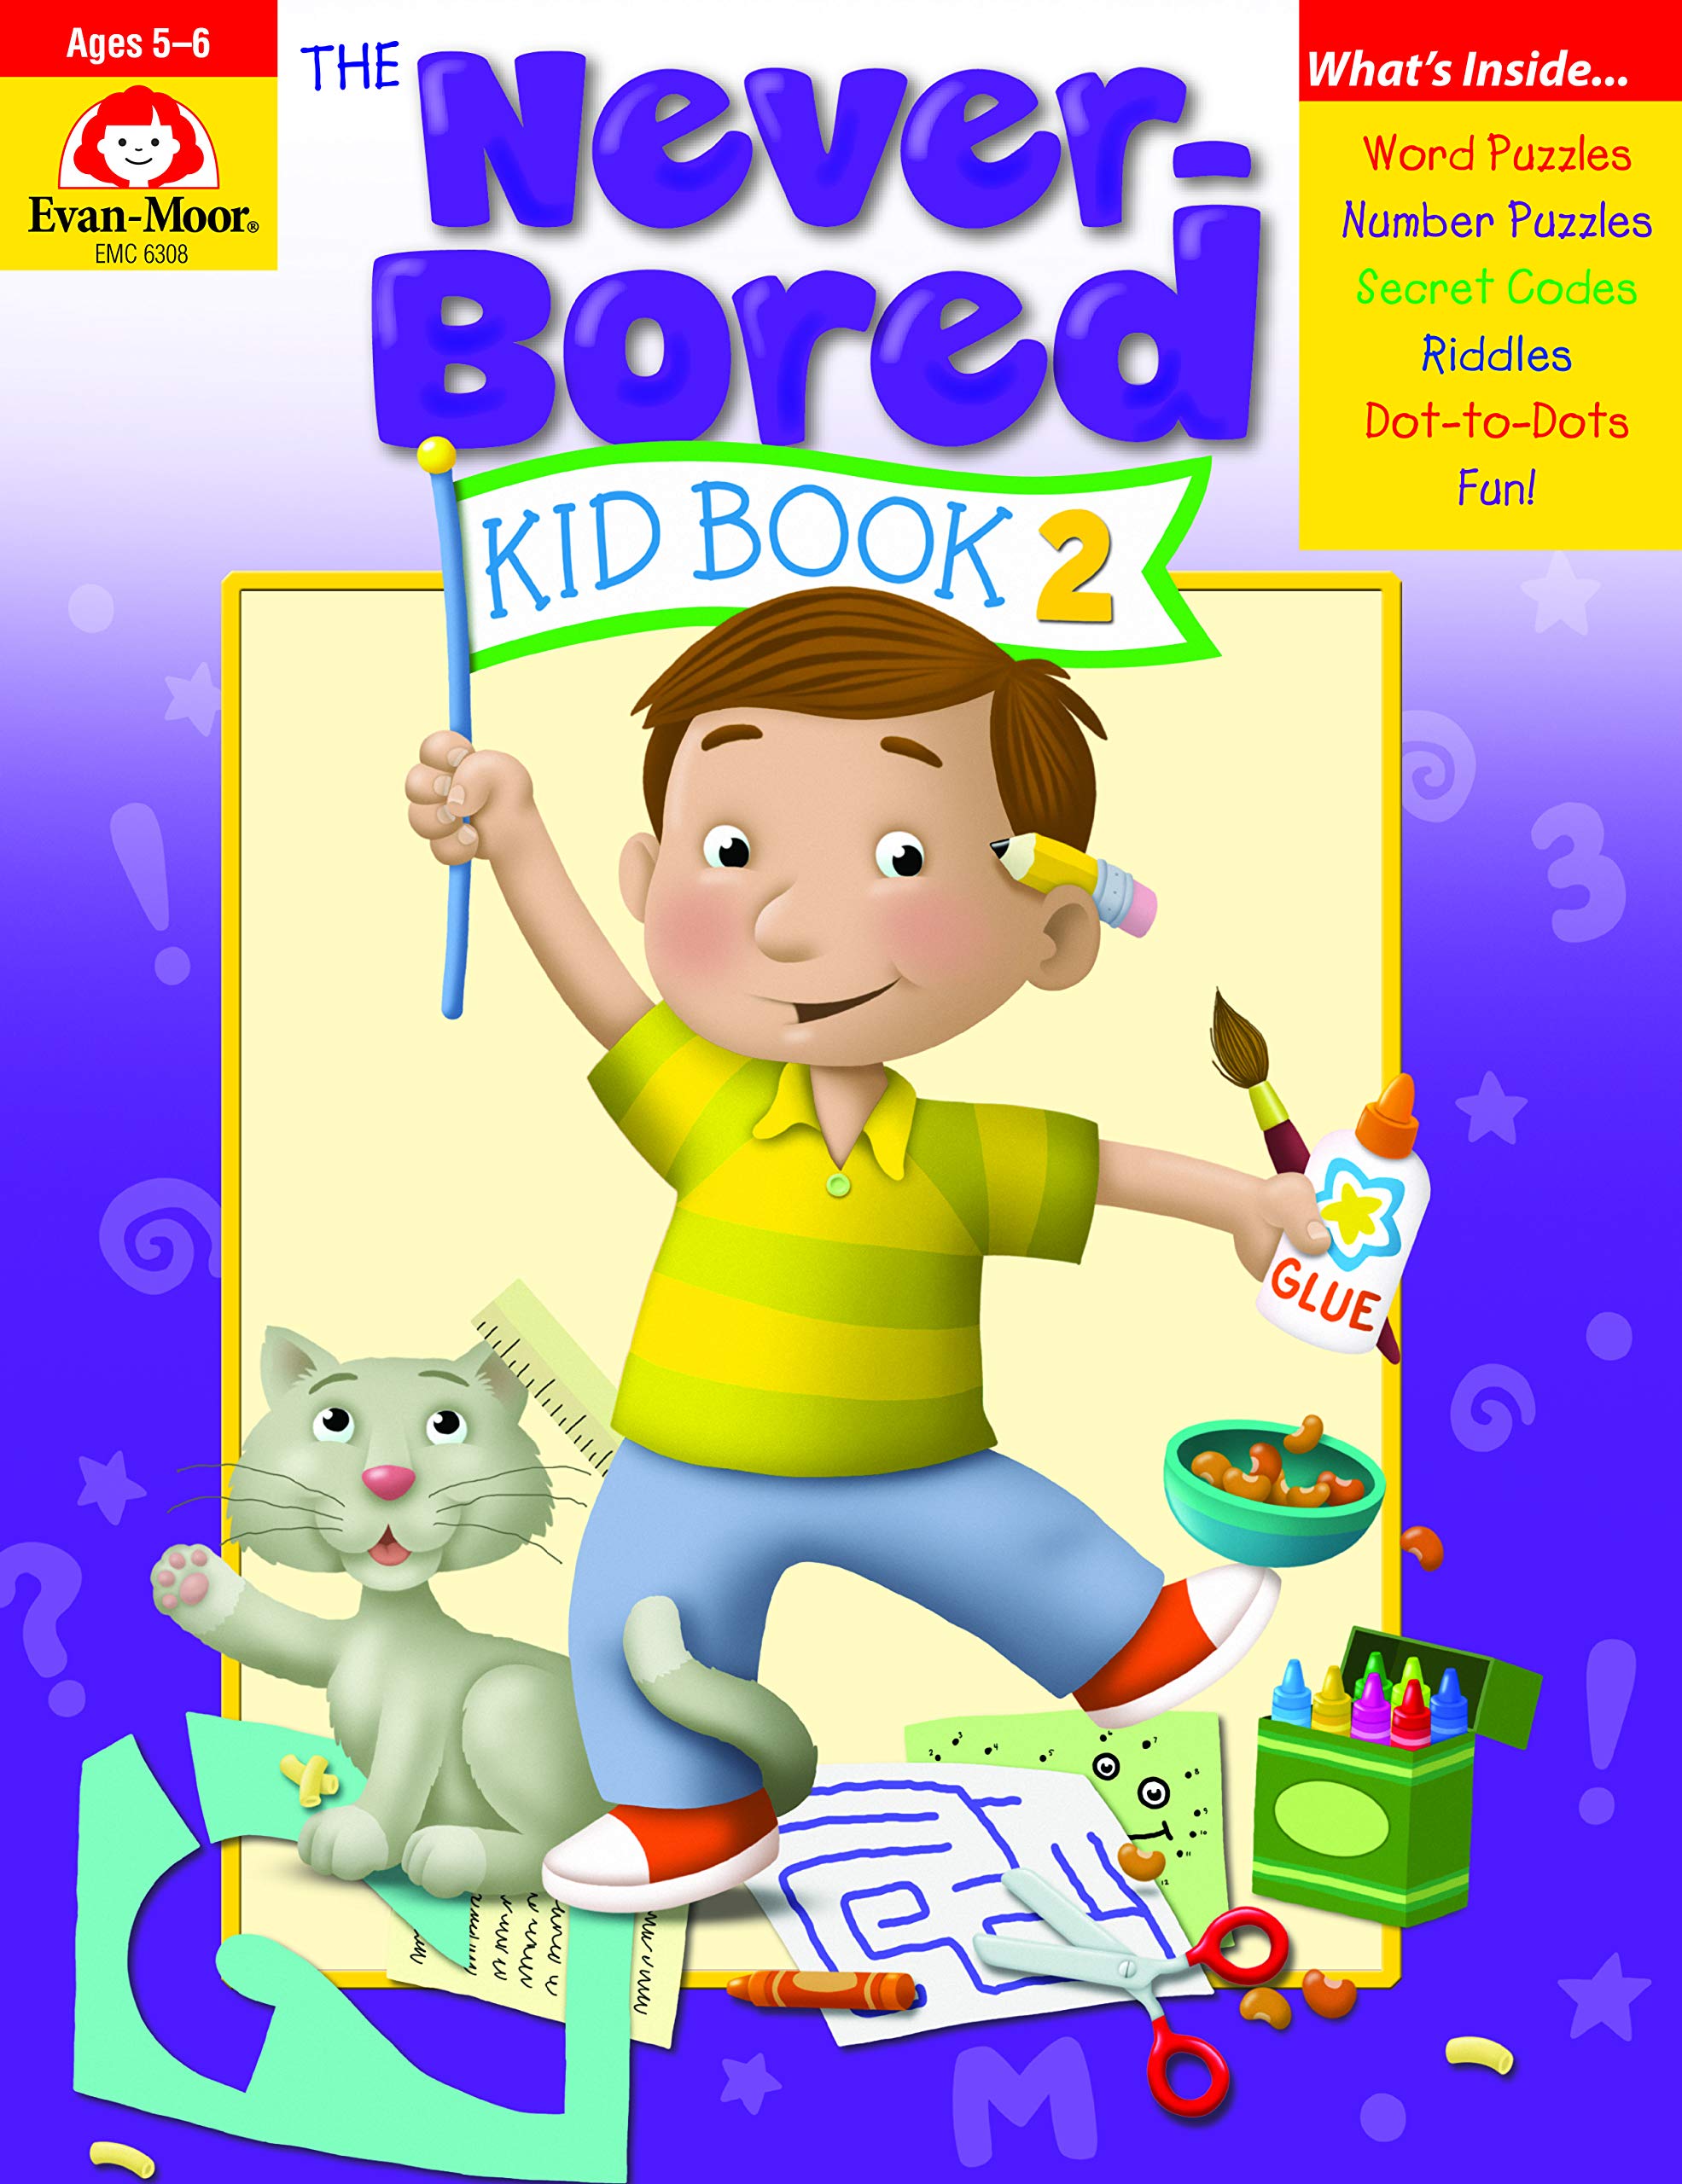 The Never-Bored (Ages 5-6) Kid Book 2